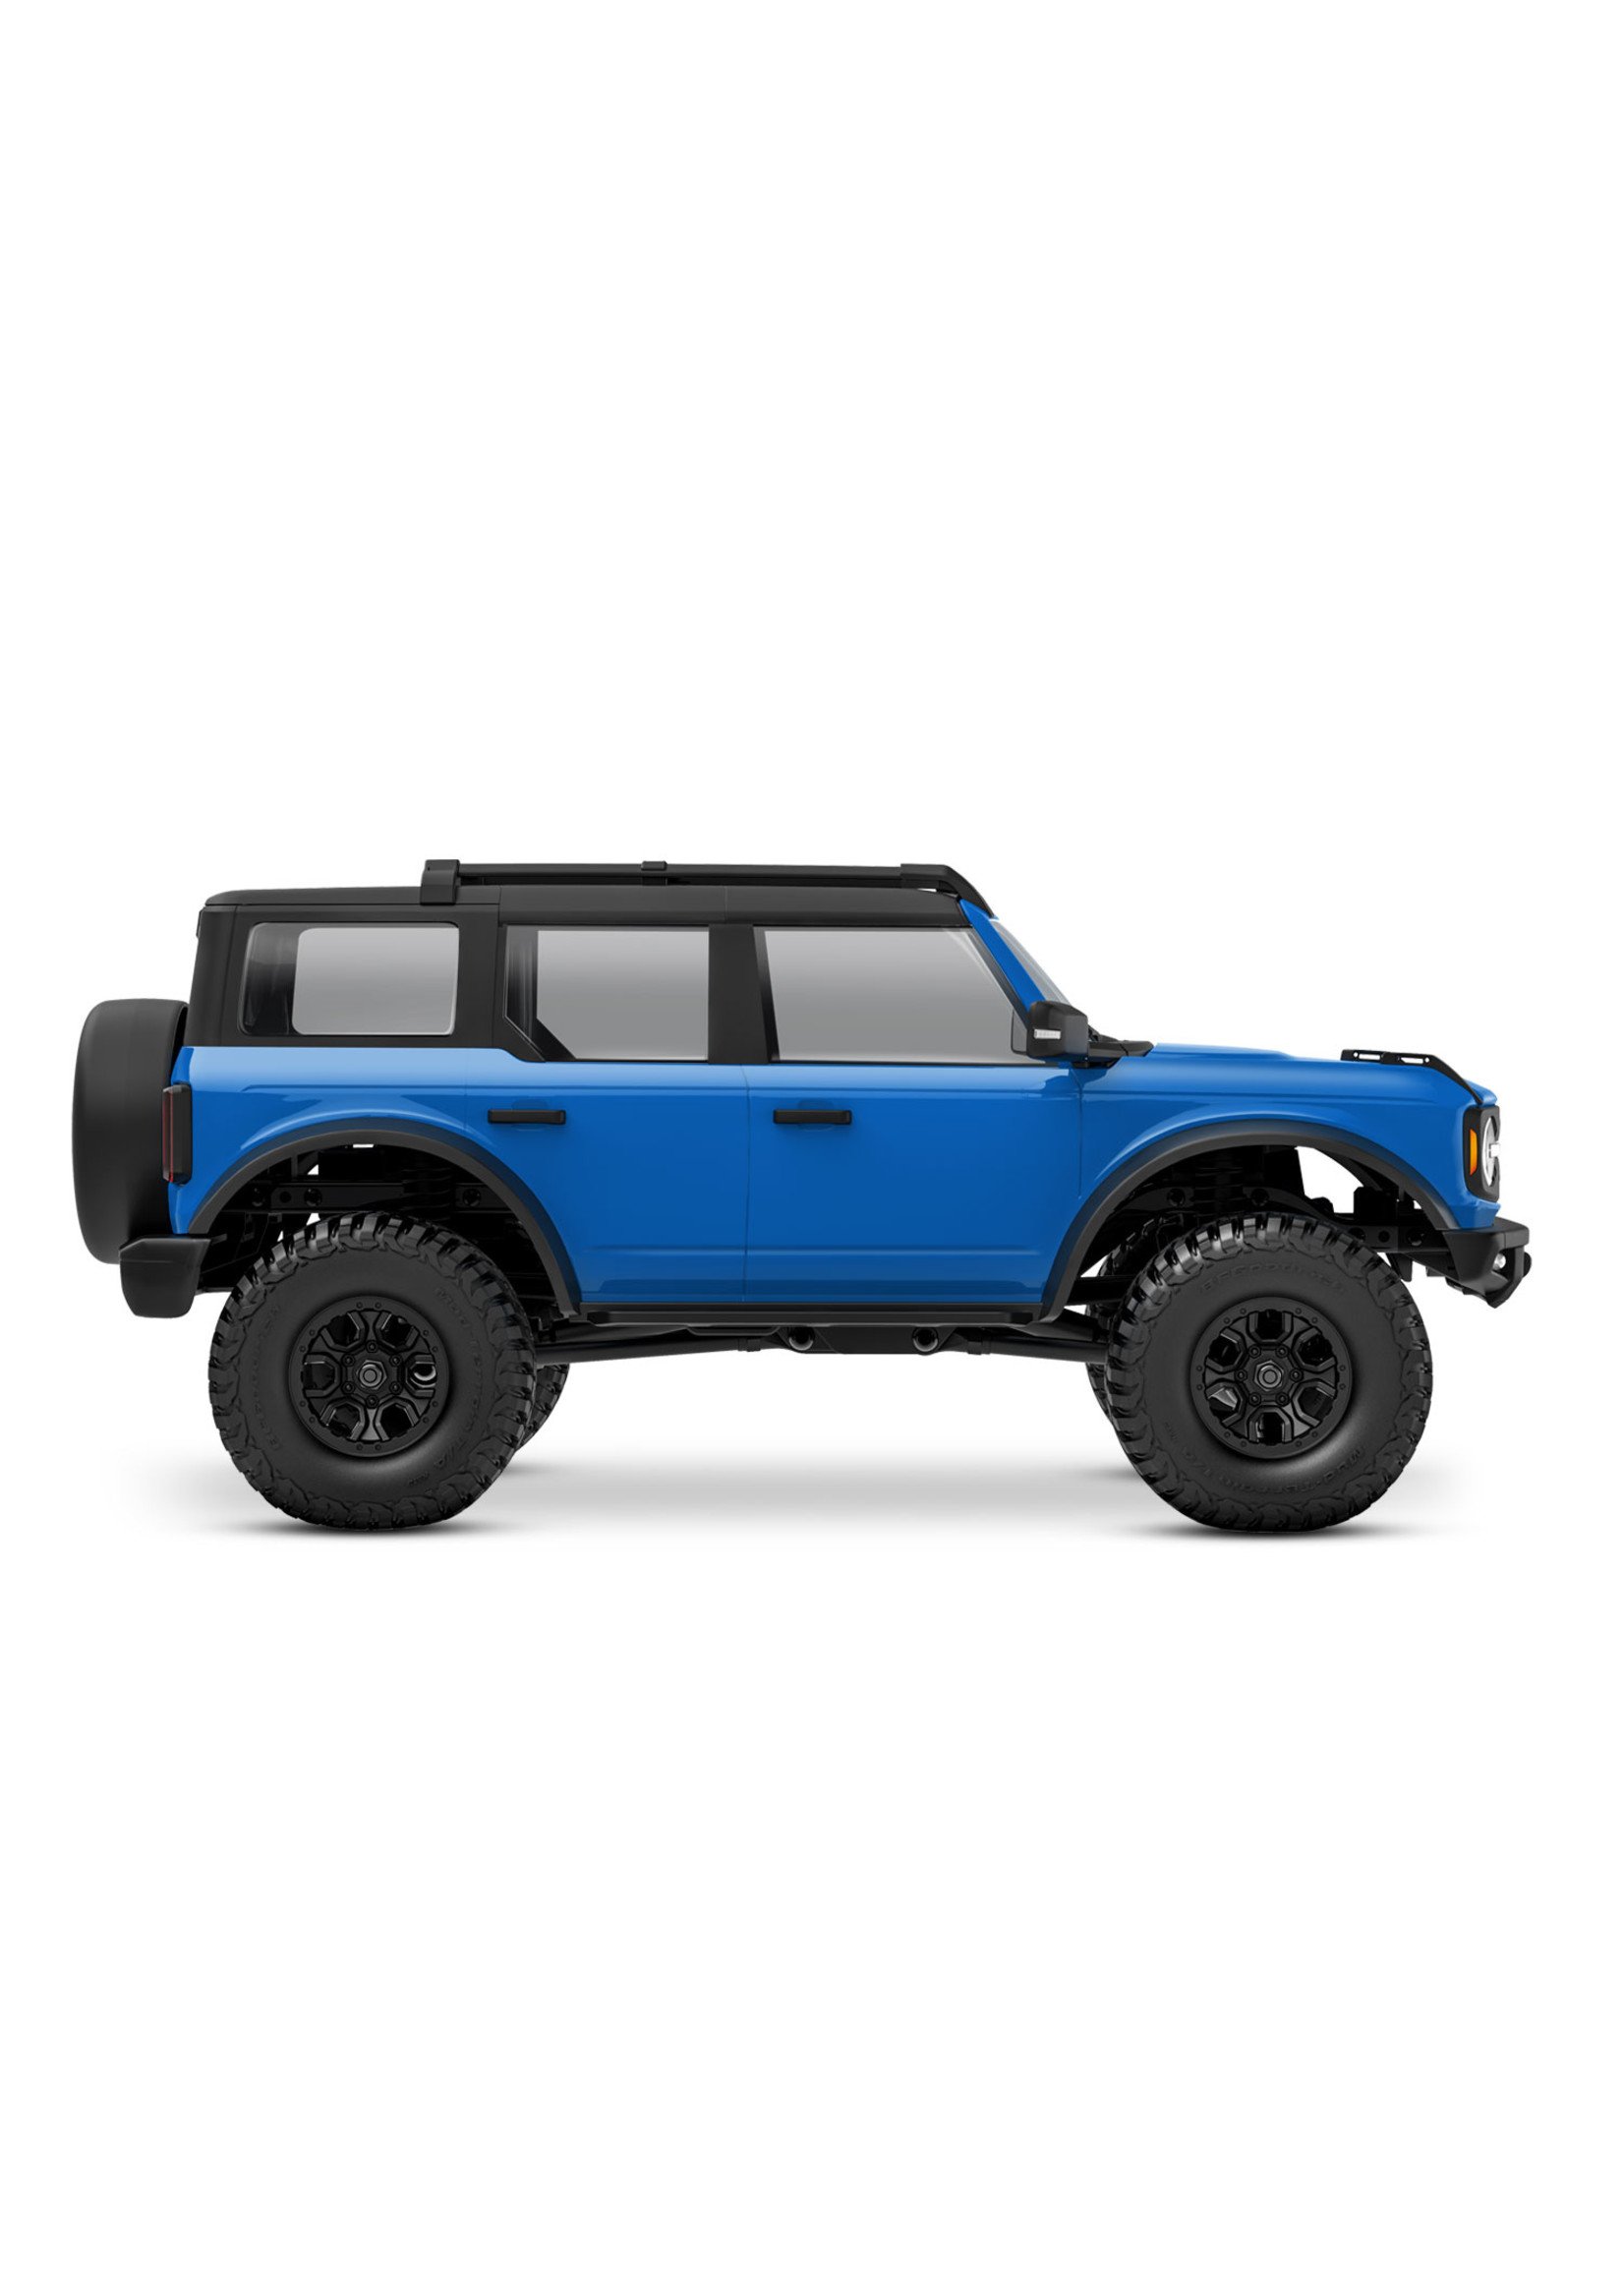 Traxxas 970741BLUE - 1/18 RTR Scale and Trail Bronco - Blue